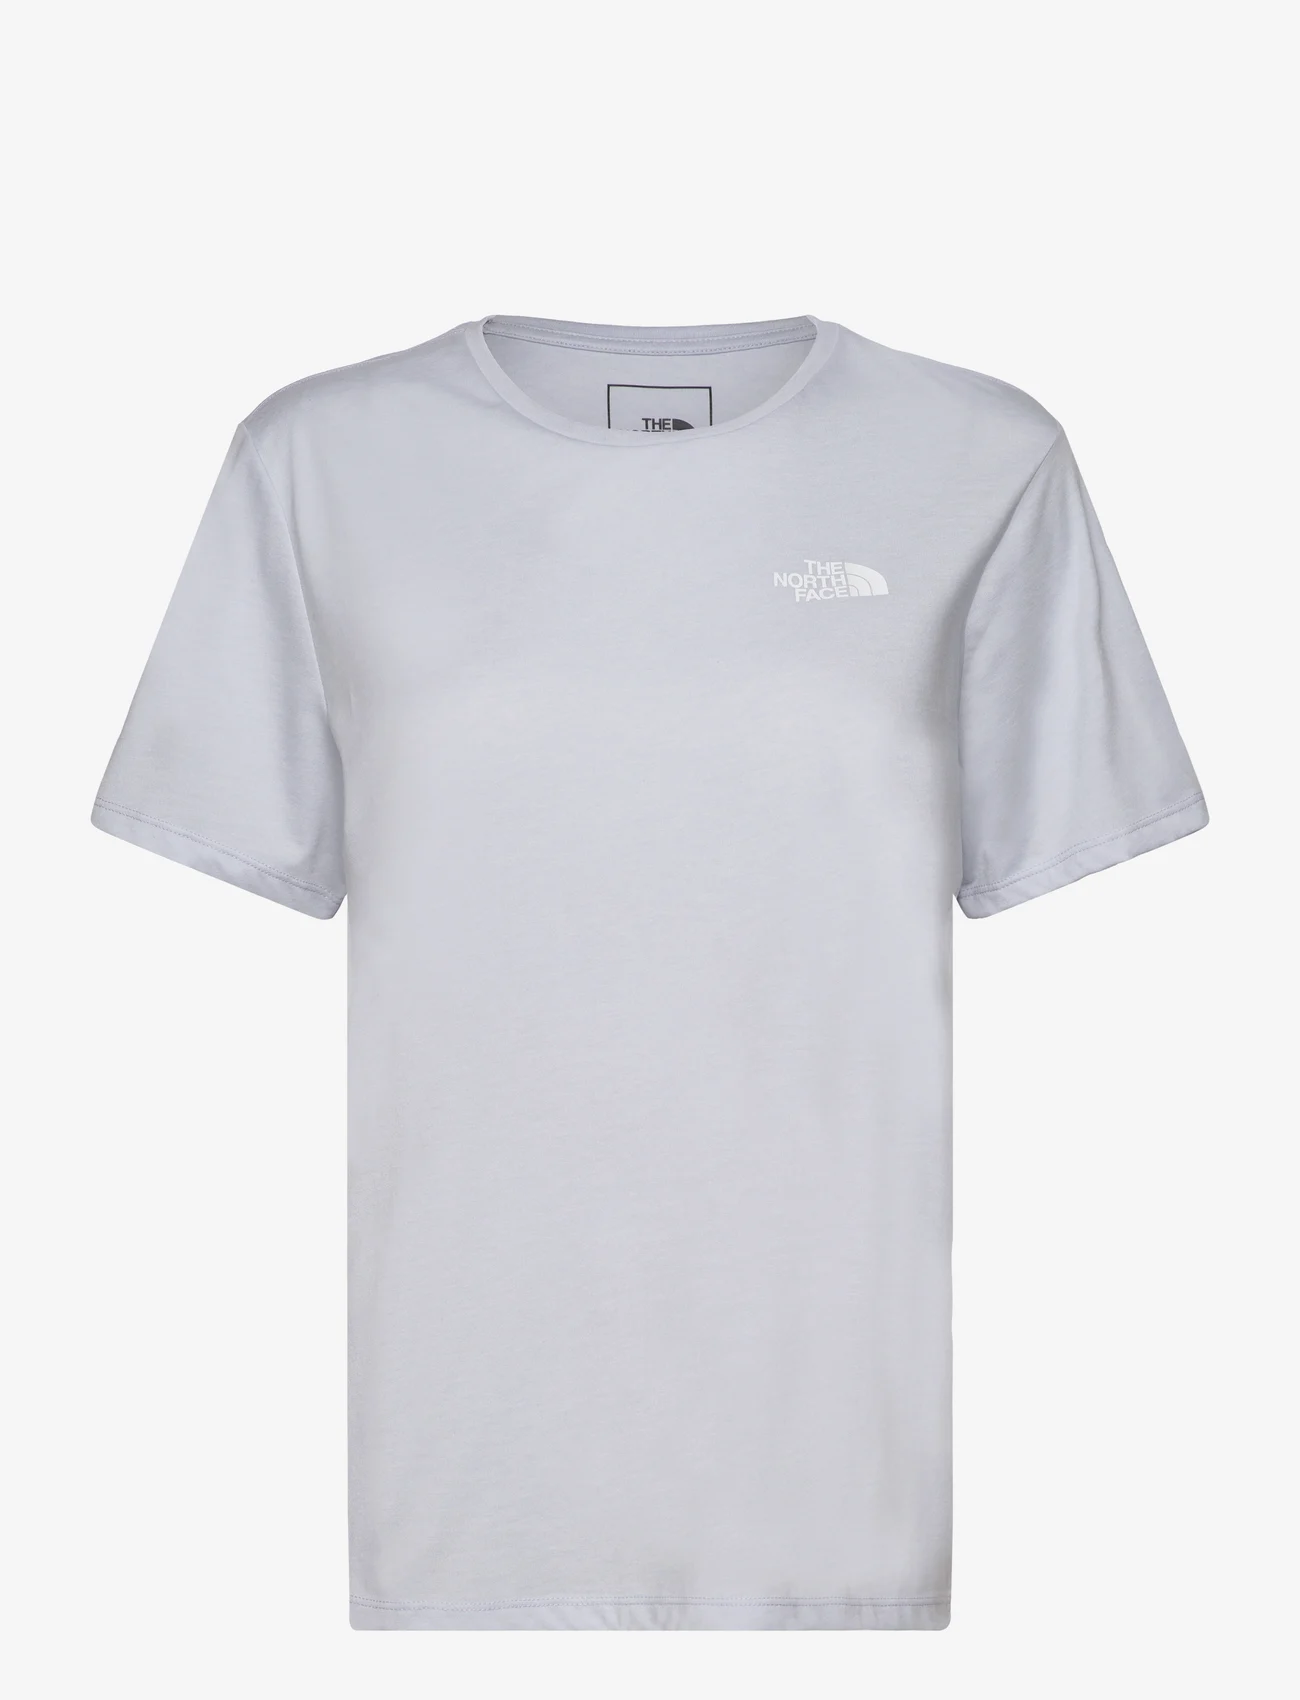 The North Face - W FOUNDATION GRAPHIC TEE - EU - t-shirts - dusty periwinkle - 0